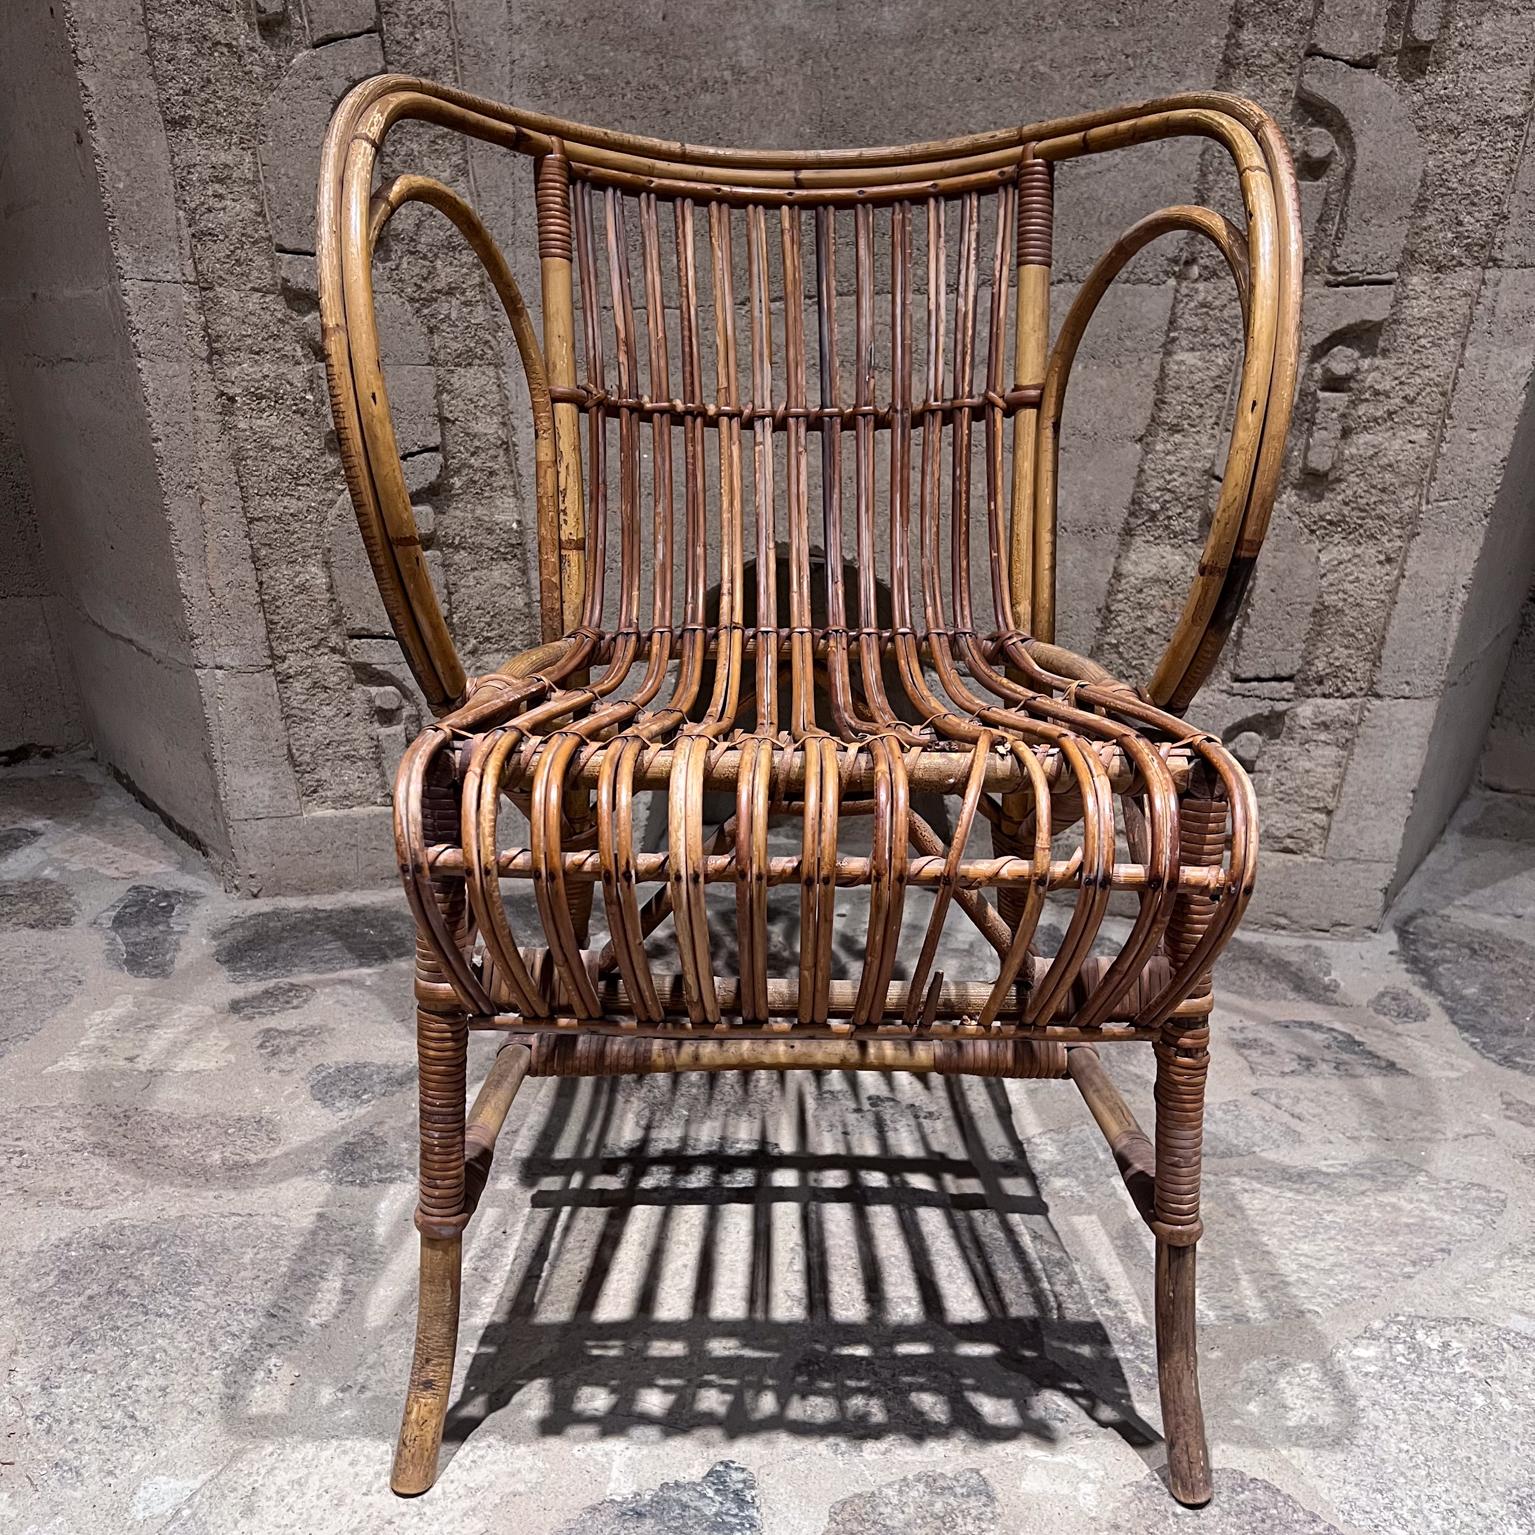 1960s refined rattan midcentury wicker patio lounge chair 
Robert Wengler of Denmark
renowned master craftsman of wicker
29 h x 20 d x 21.5 w Seat h 14.75
preowned original unrestored vintage condition.
Please refer to our images.
Delivery to LA OC